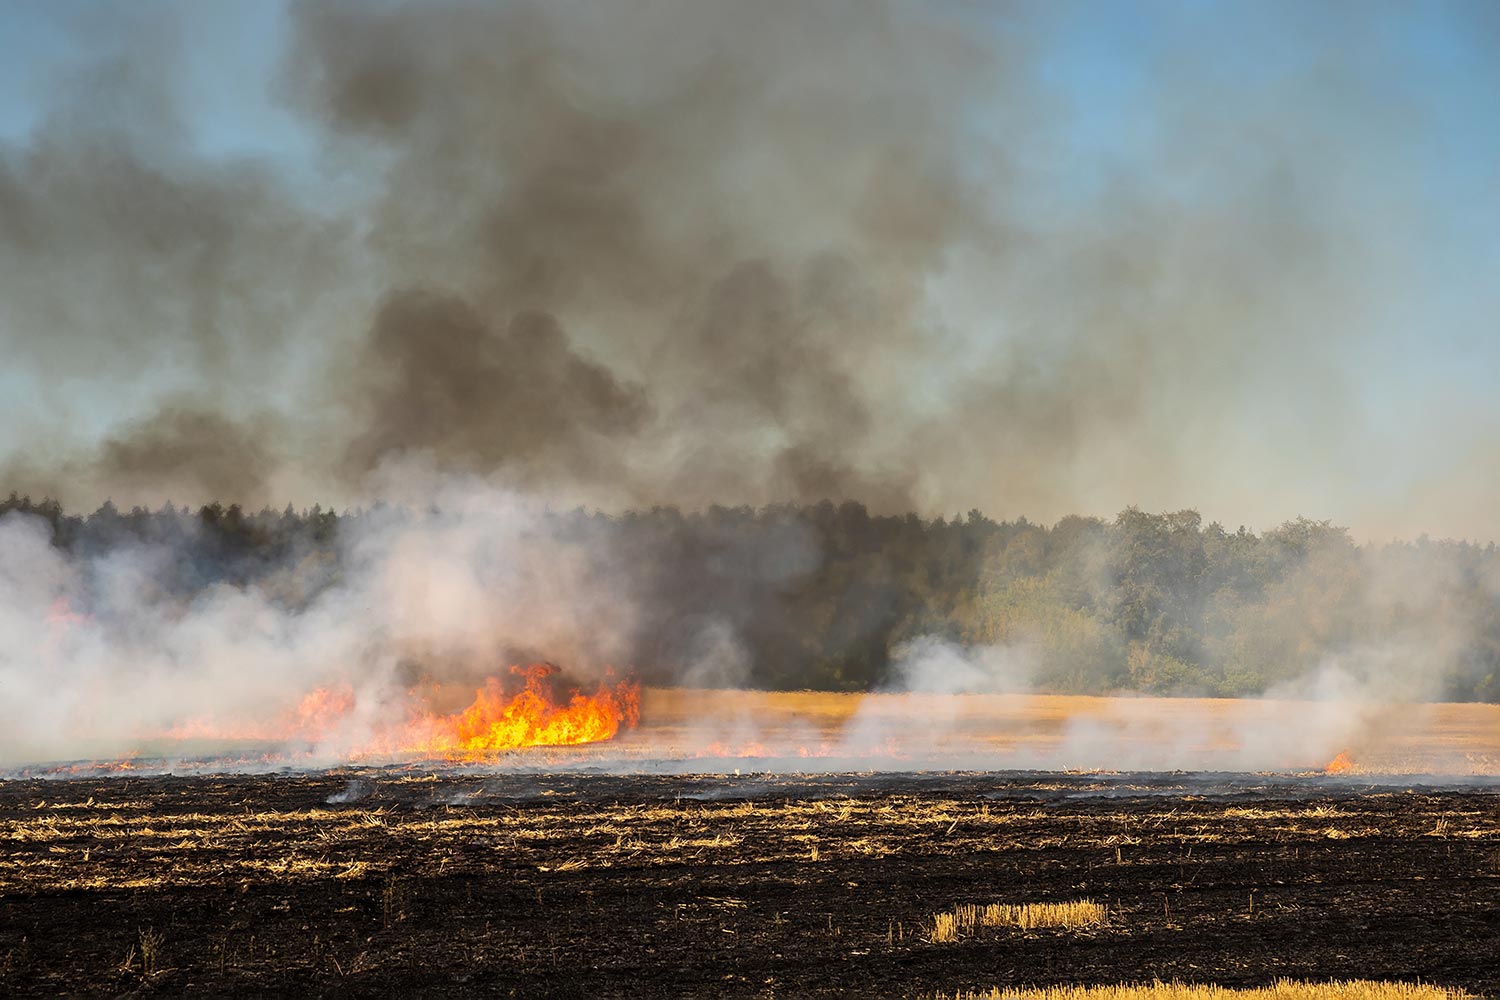 Wildfire on wheat field stubble after harvesting near forest